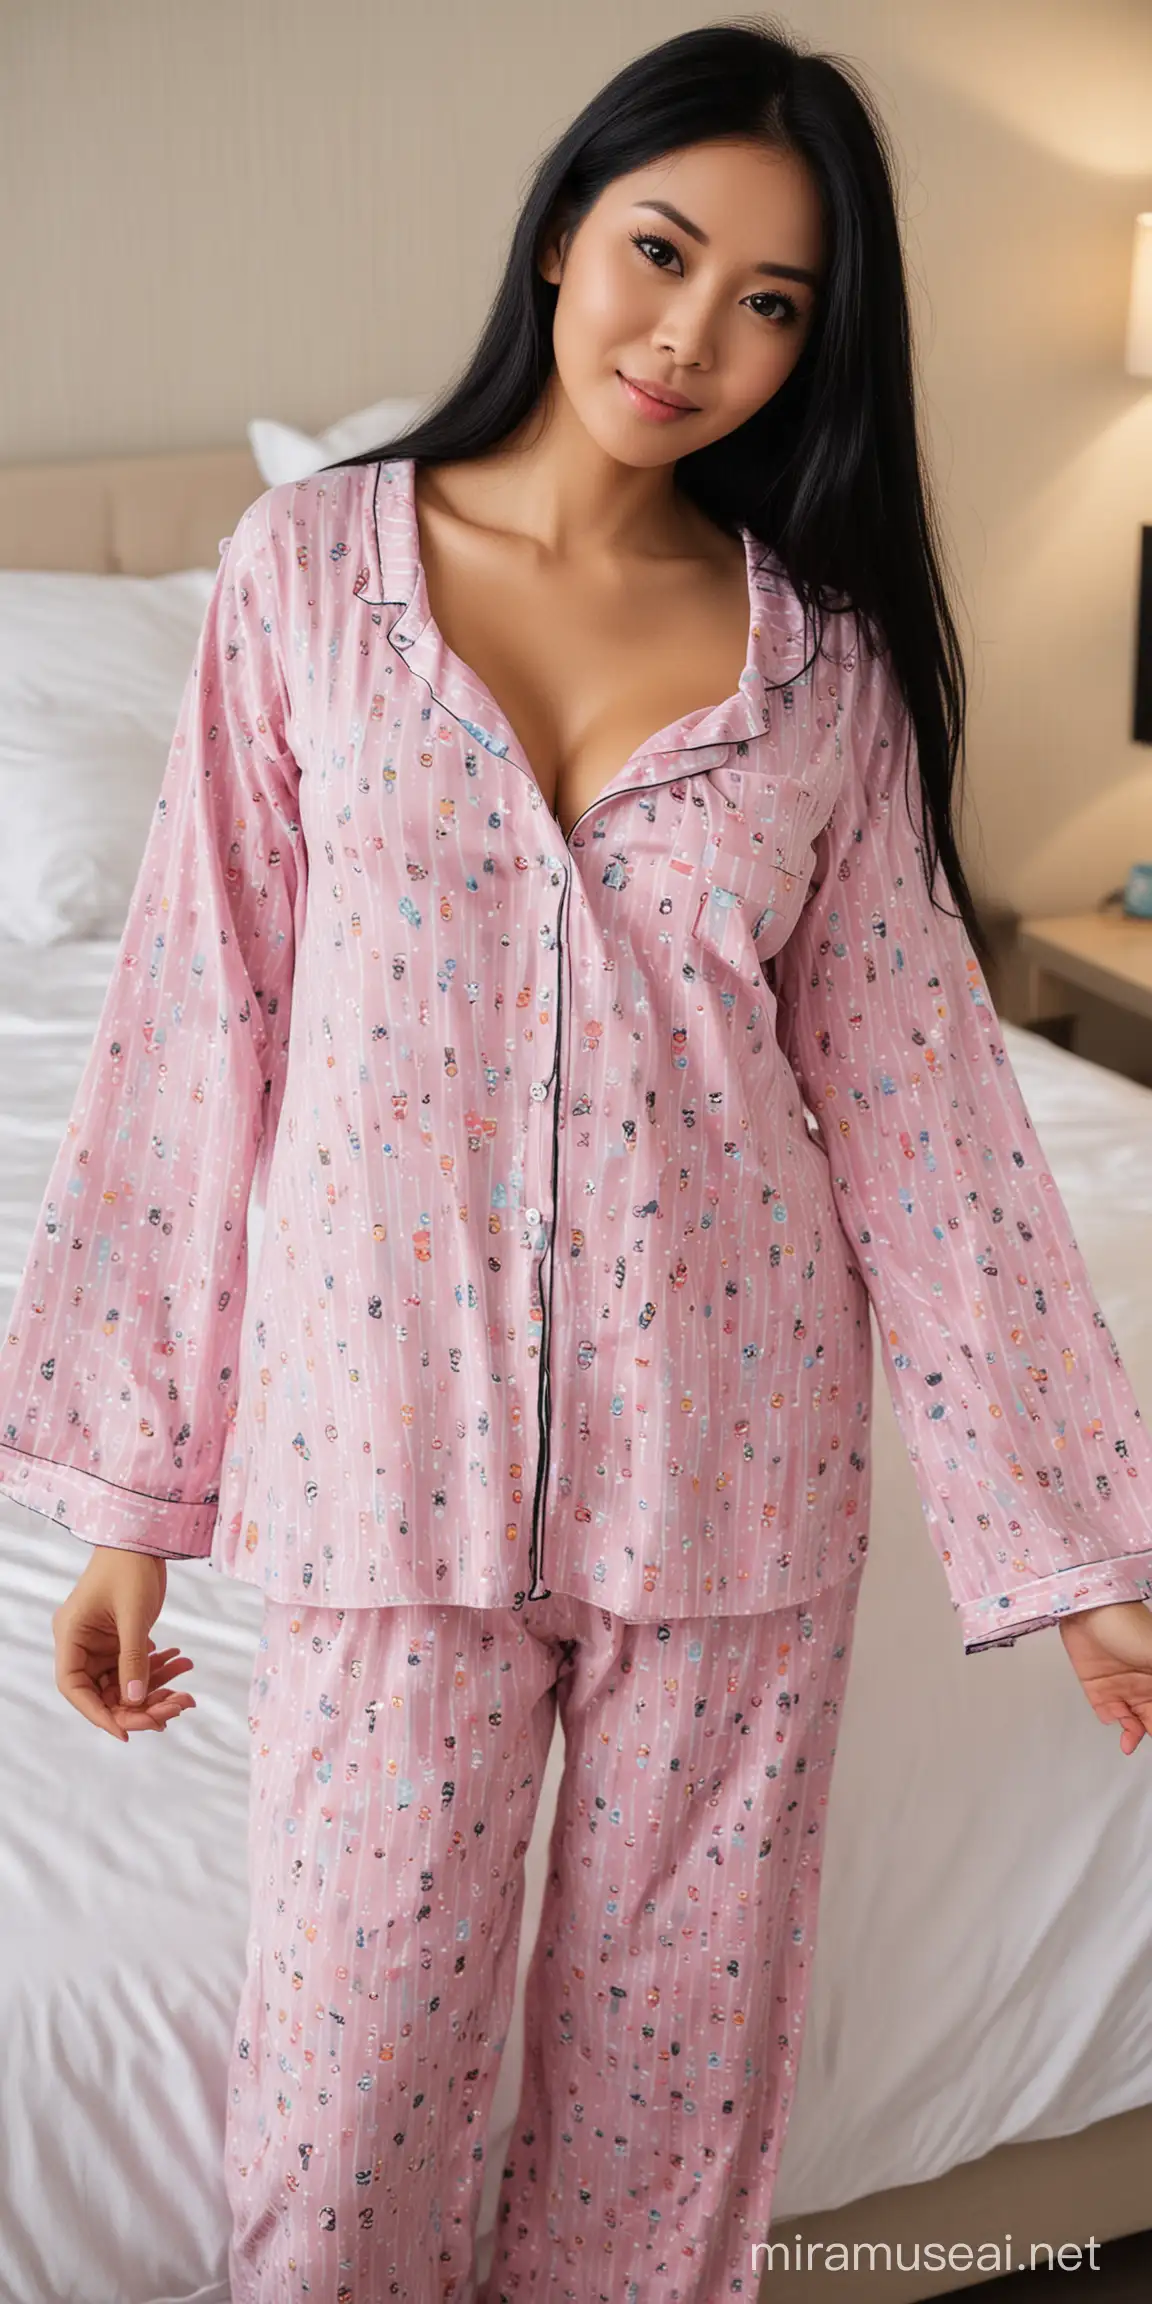 Stunning Indonesian Woman in Pajamas with Long Black Hair and Large Breasts